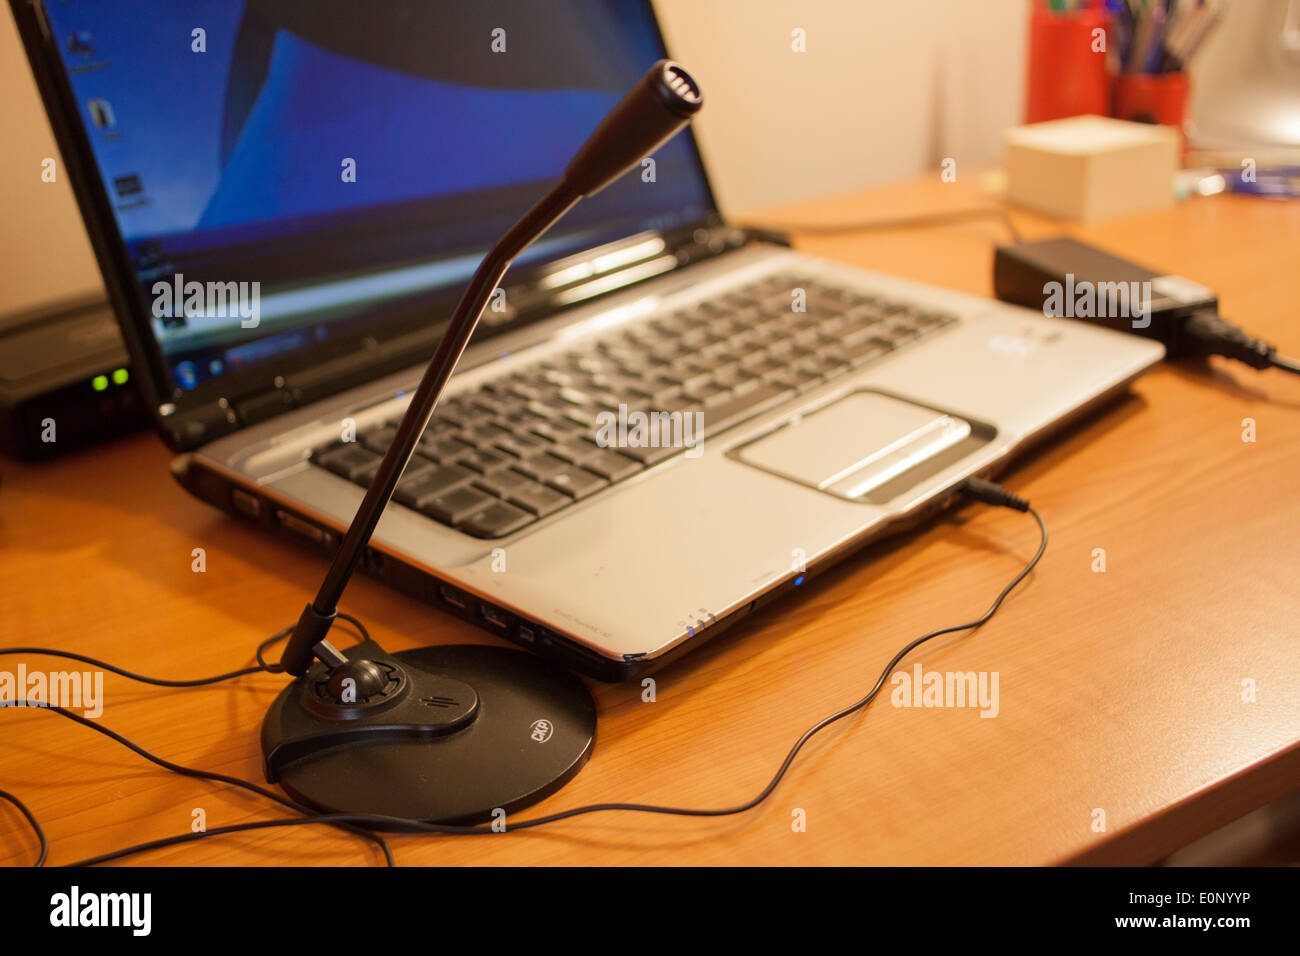 Laptop setup with microphone Stock Photo